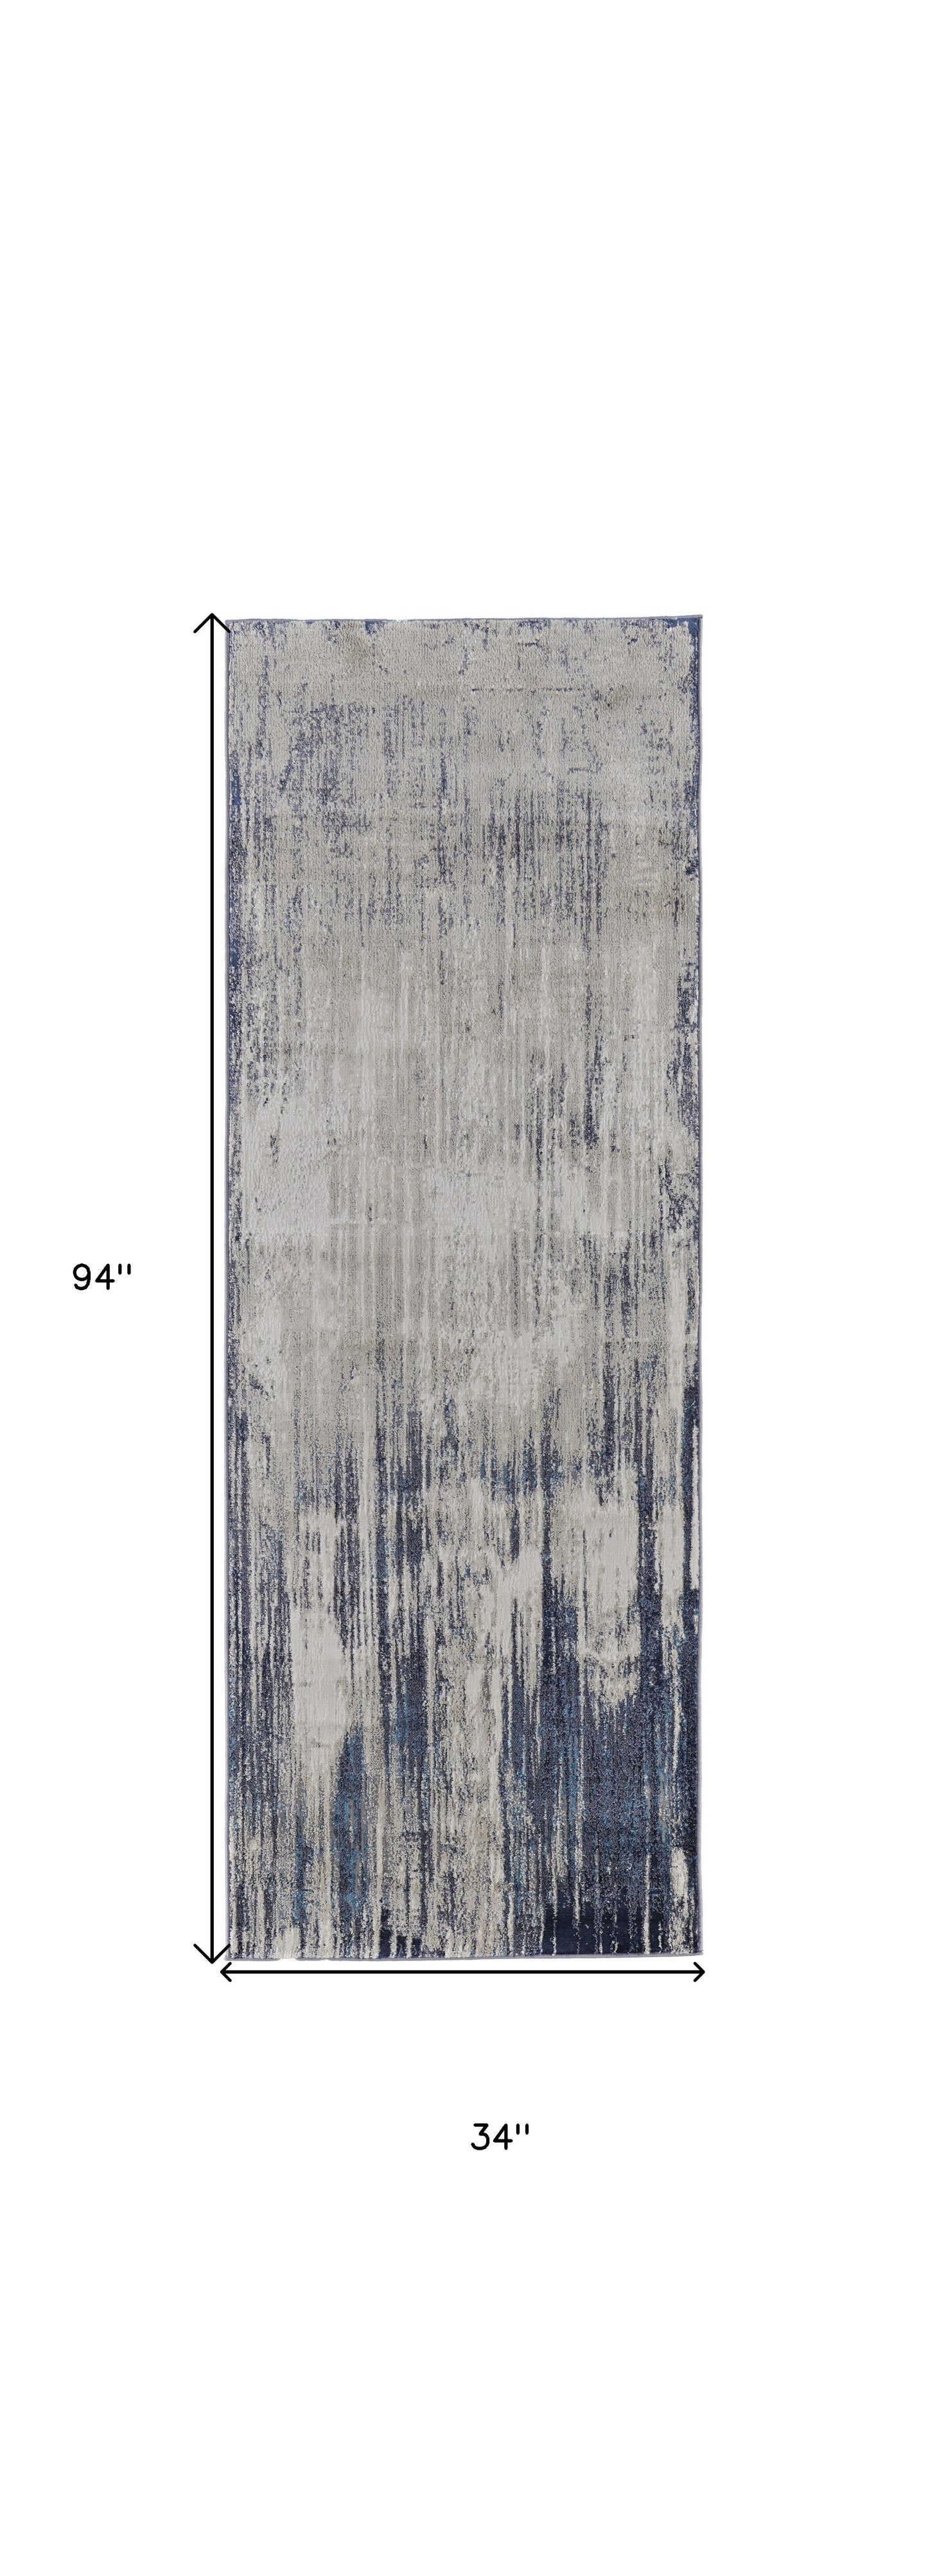 9' X 12' Tan Blue And Ivory Abstract Power Loom Distressed Area Rug